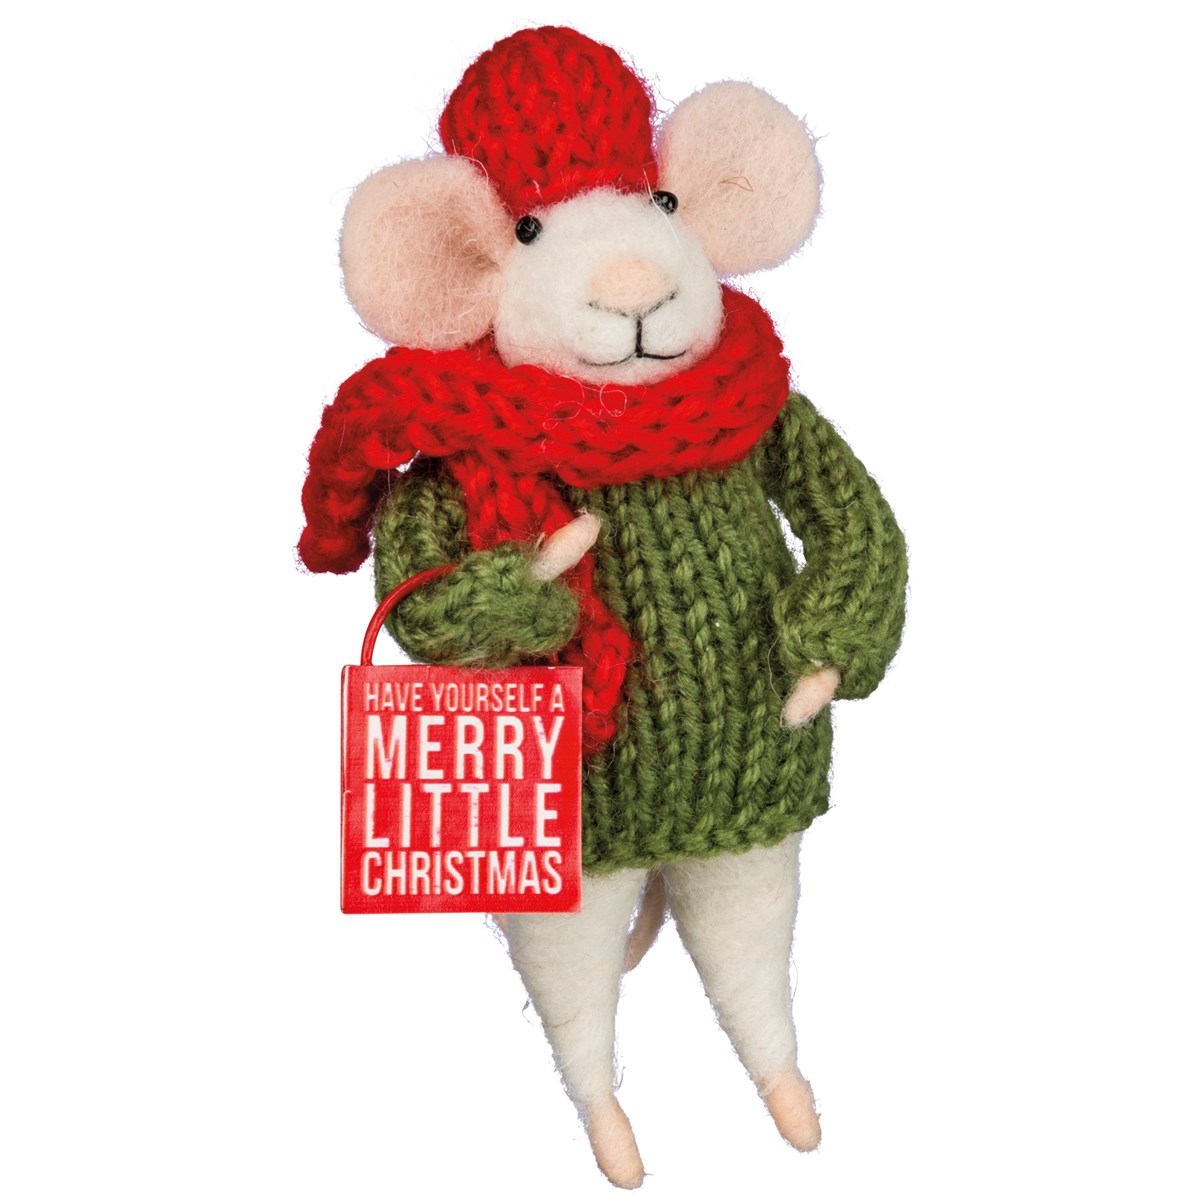 Merry Little Mouse Critter - Wool, Polyester, Metal, Plastic